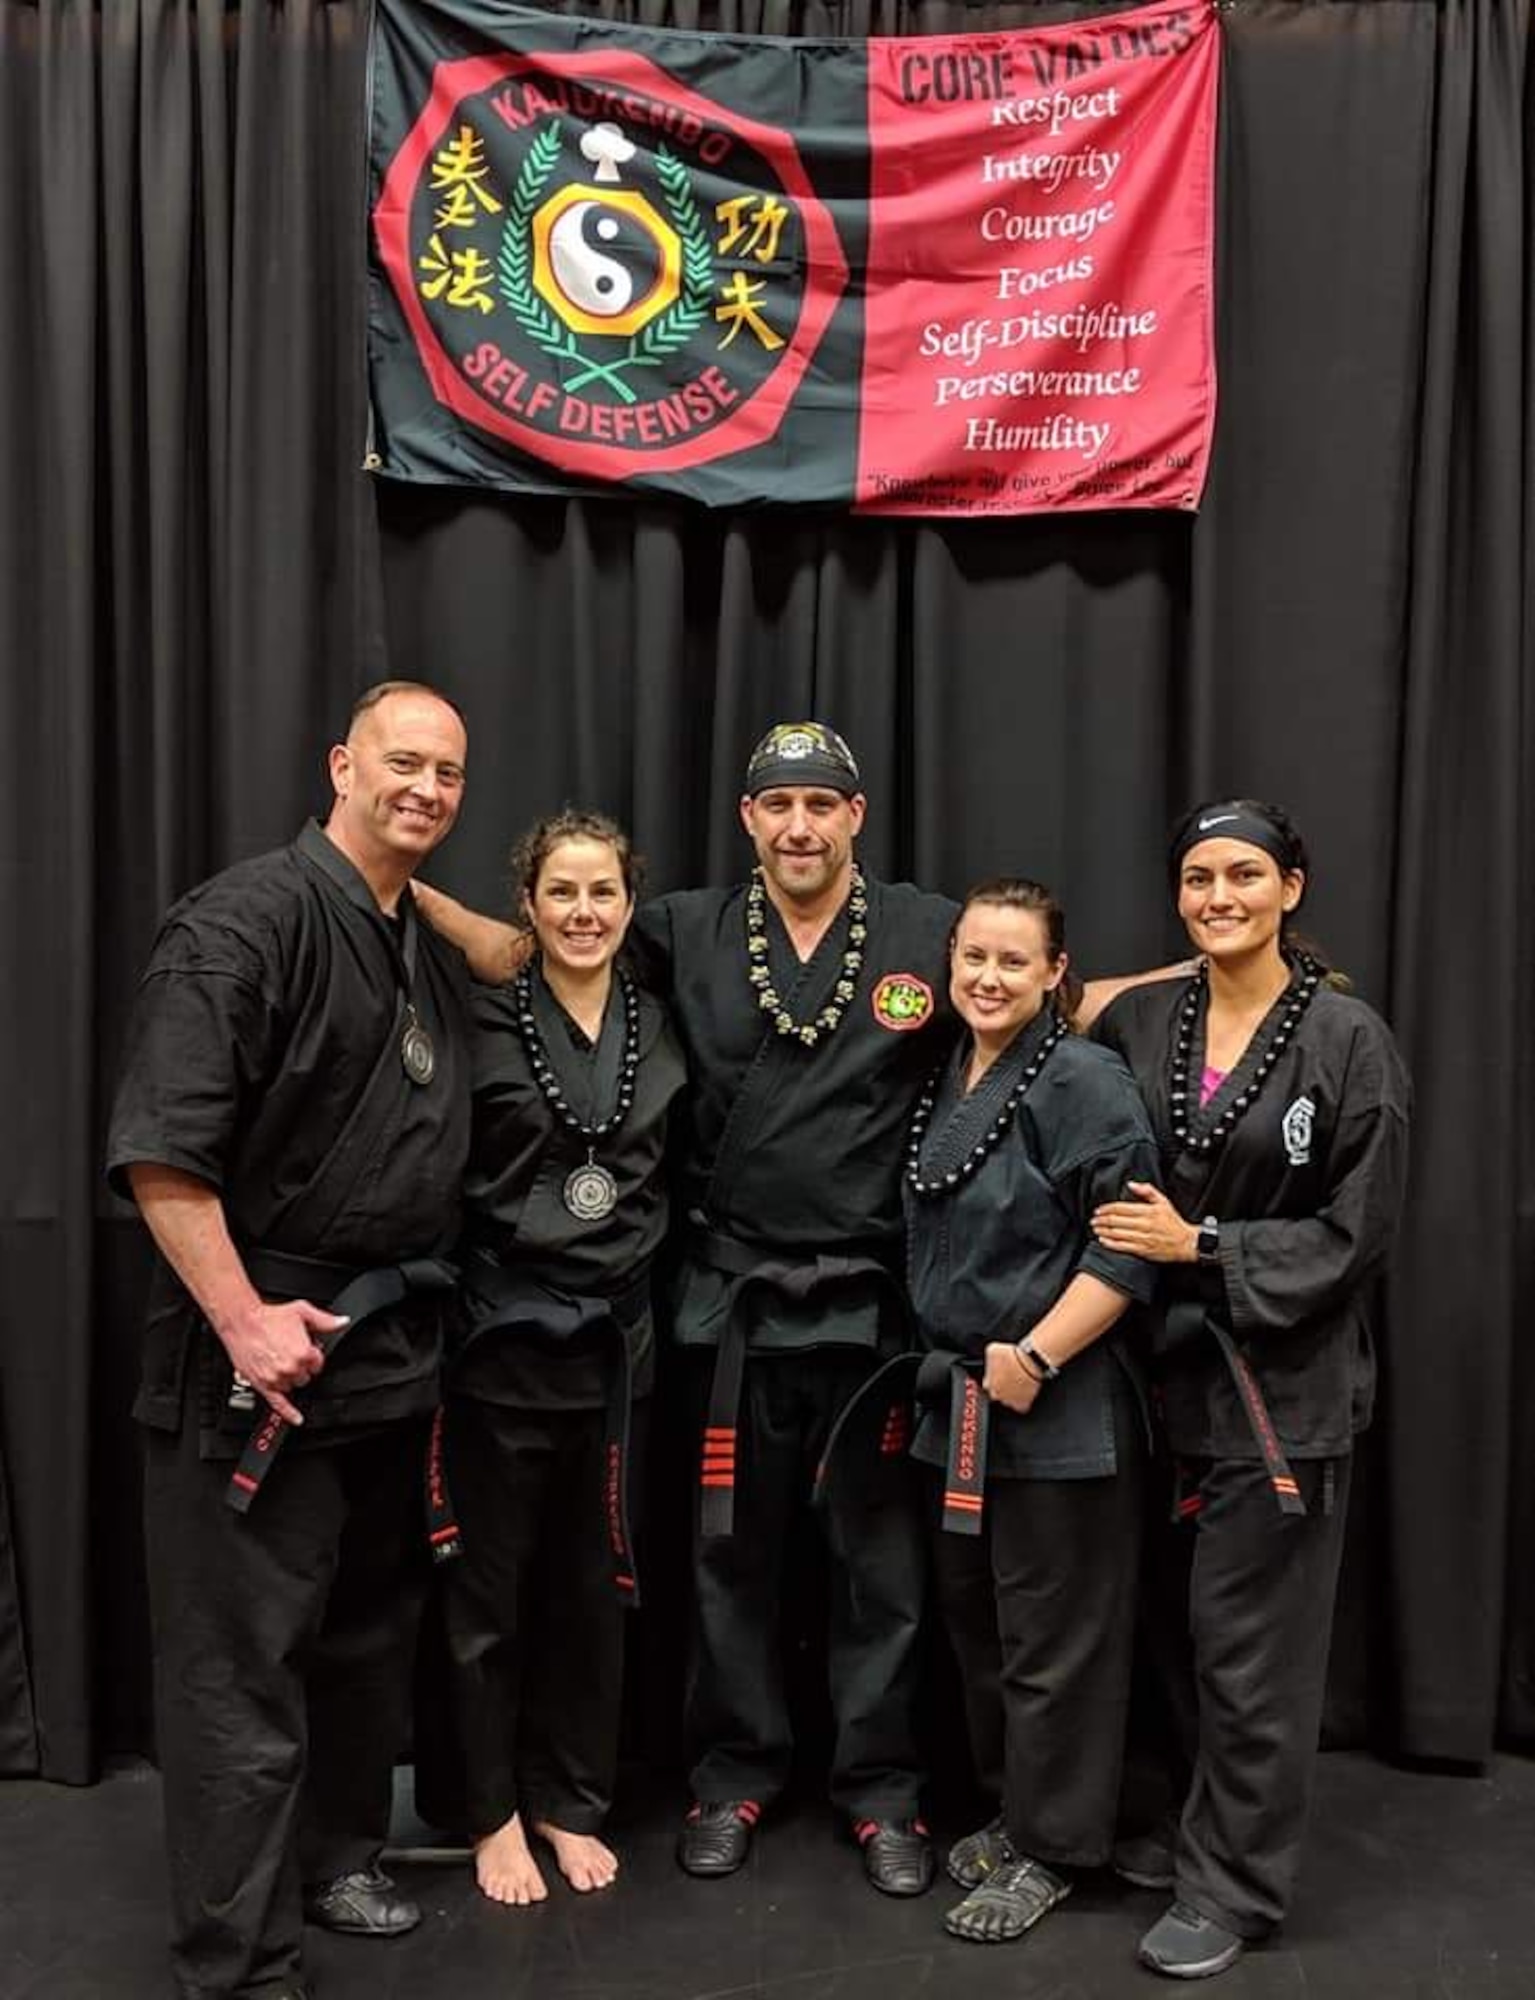 Senior Master Sgt. Scott Newberger, assigned to the 161st Air Refueling Wing, poses with fellow back belt Dojo martial artists, Phoenix, Ariz., December 17, 2019. Newberger is passionate about his experience in martial arts and how it propels him in his military career. (Courtesy photo, SMSgt Scott Newberger)